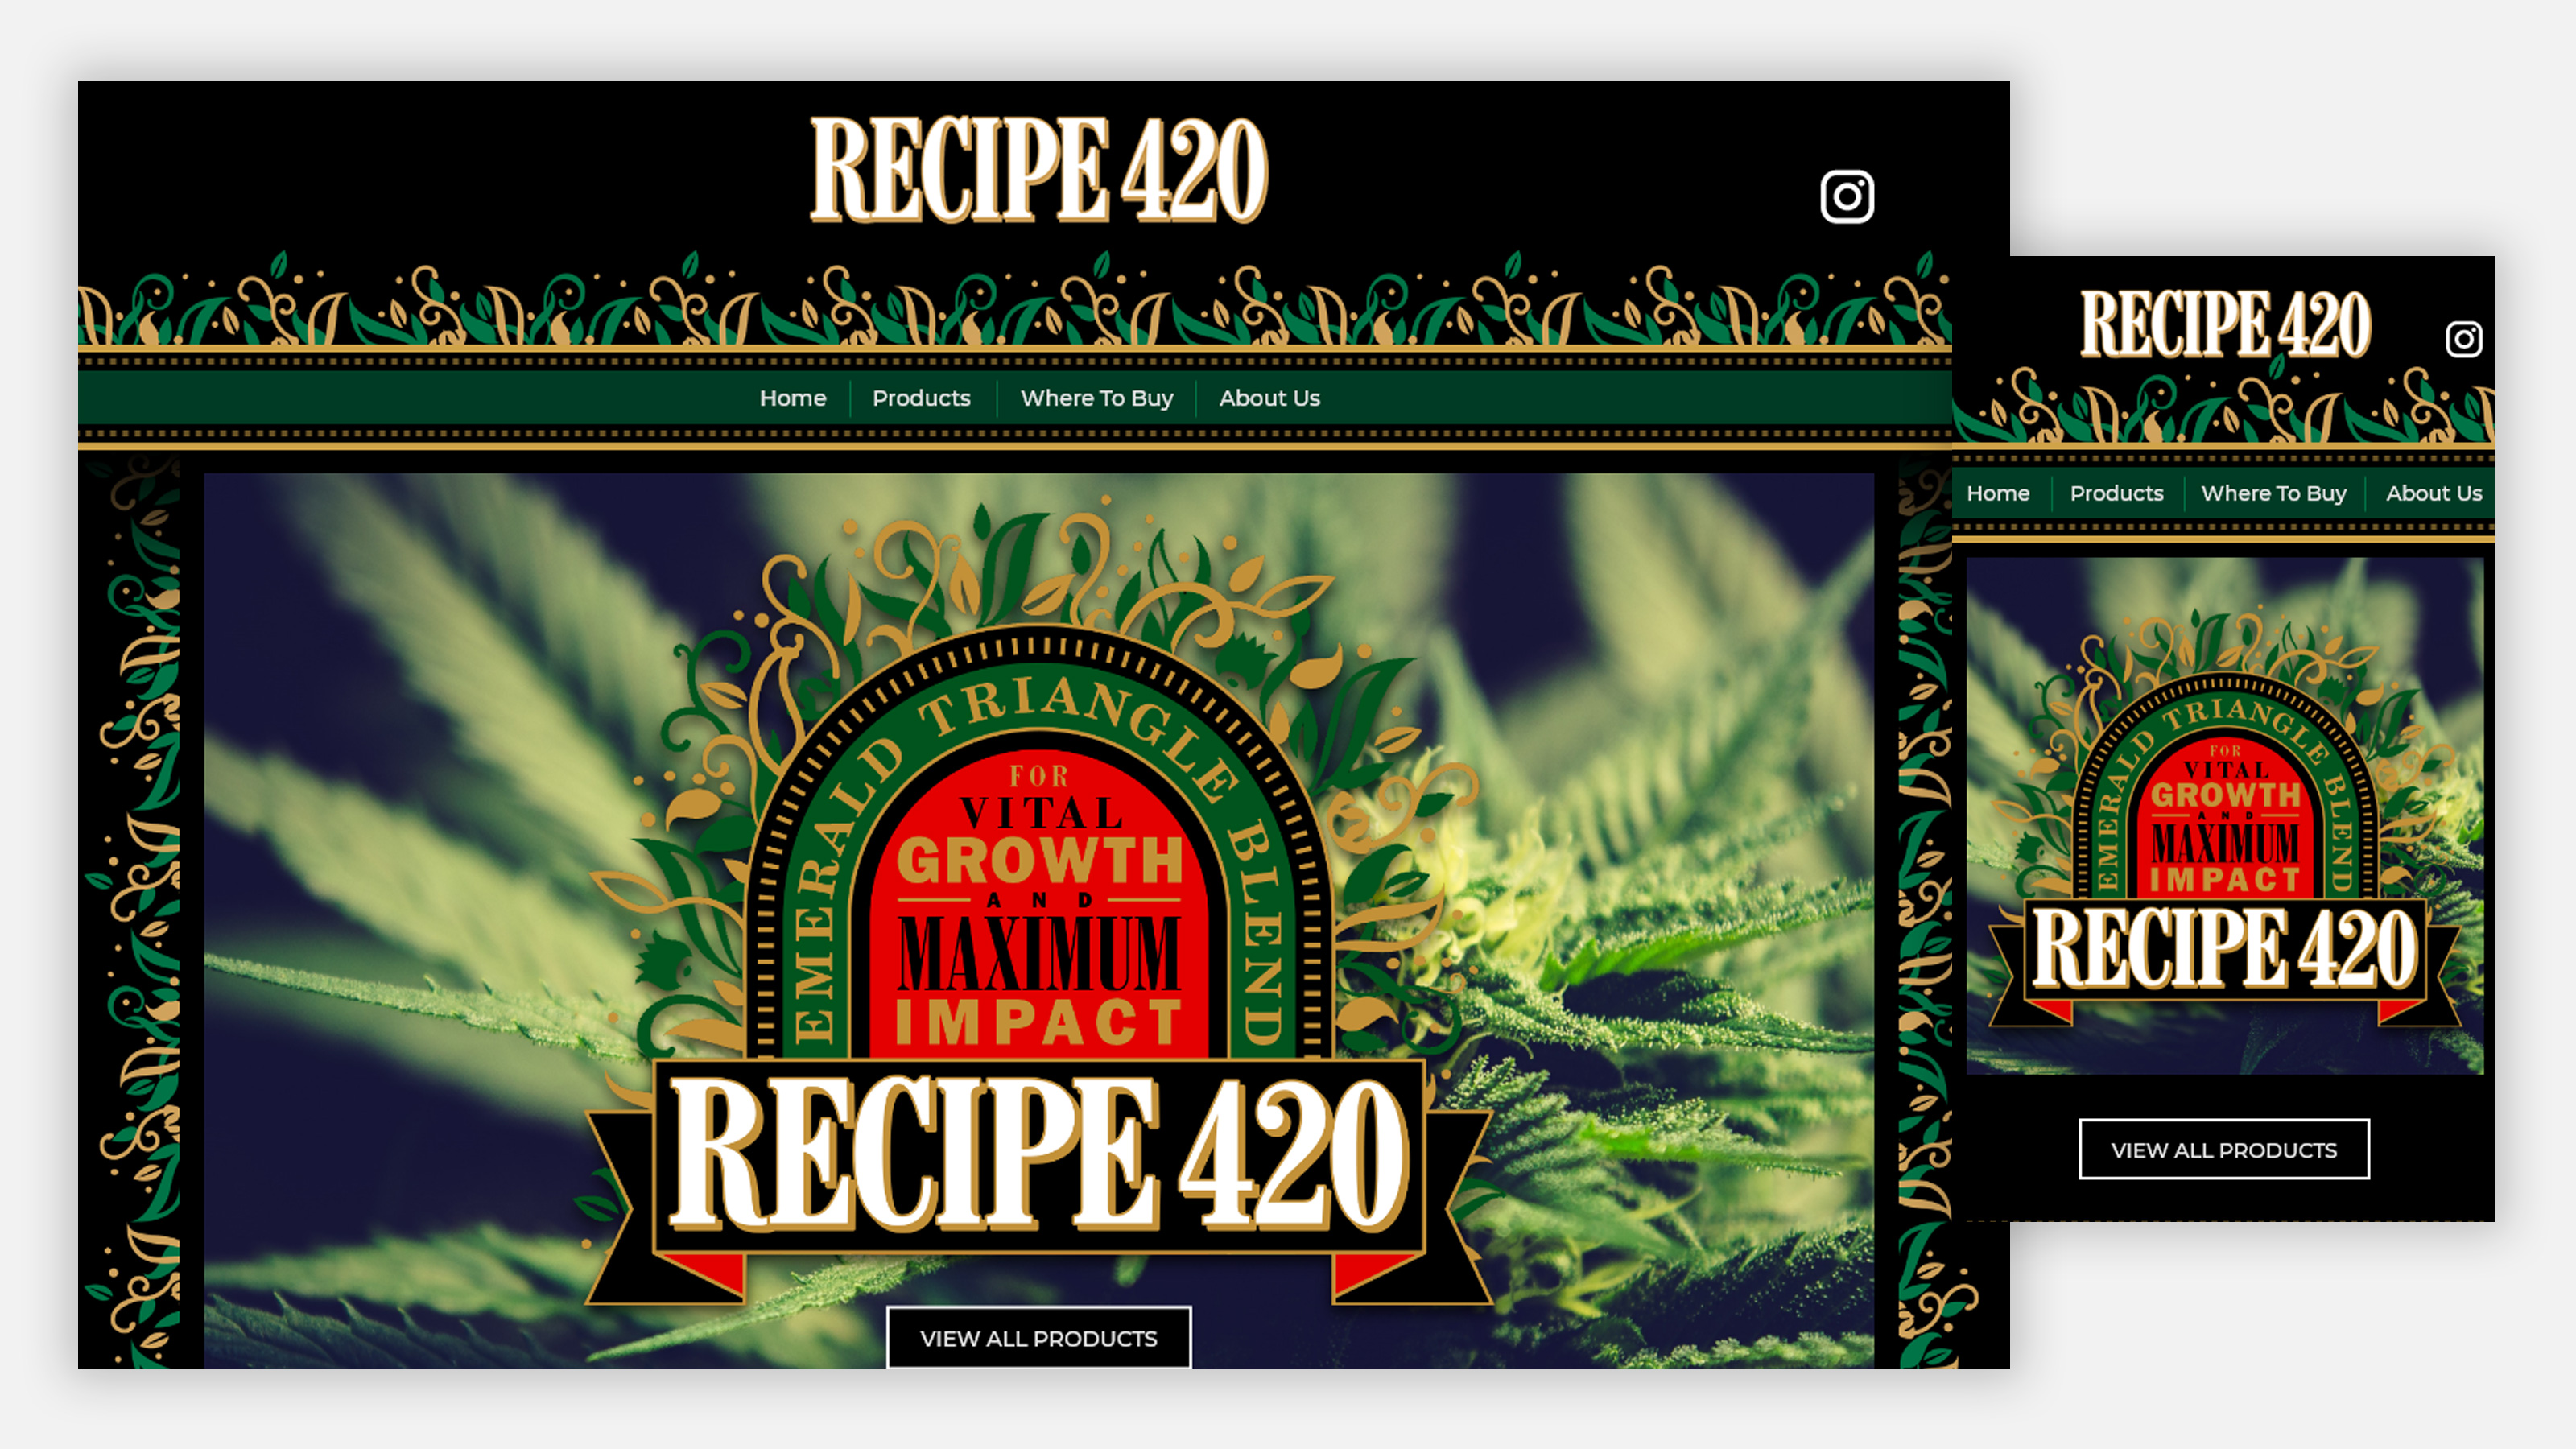 Recipe 420 website home page on desktop and mobile